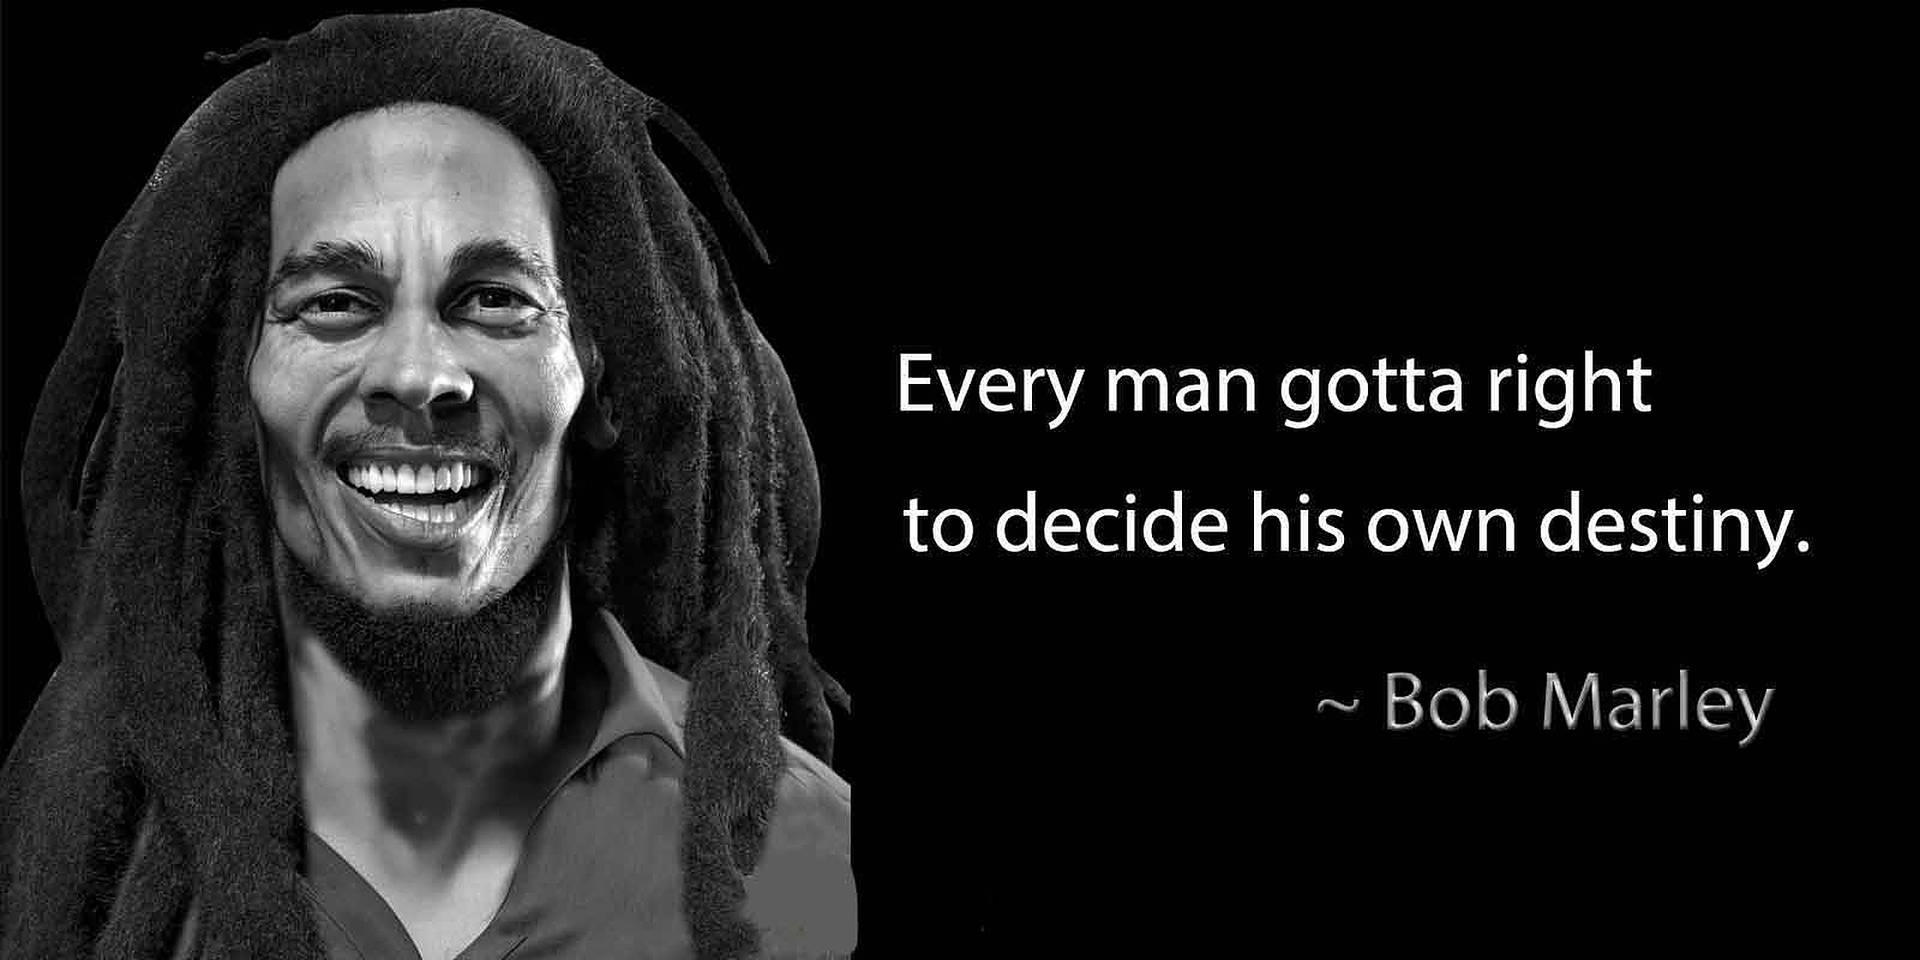 Bob Marley Quotes About Destiny Background